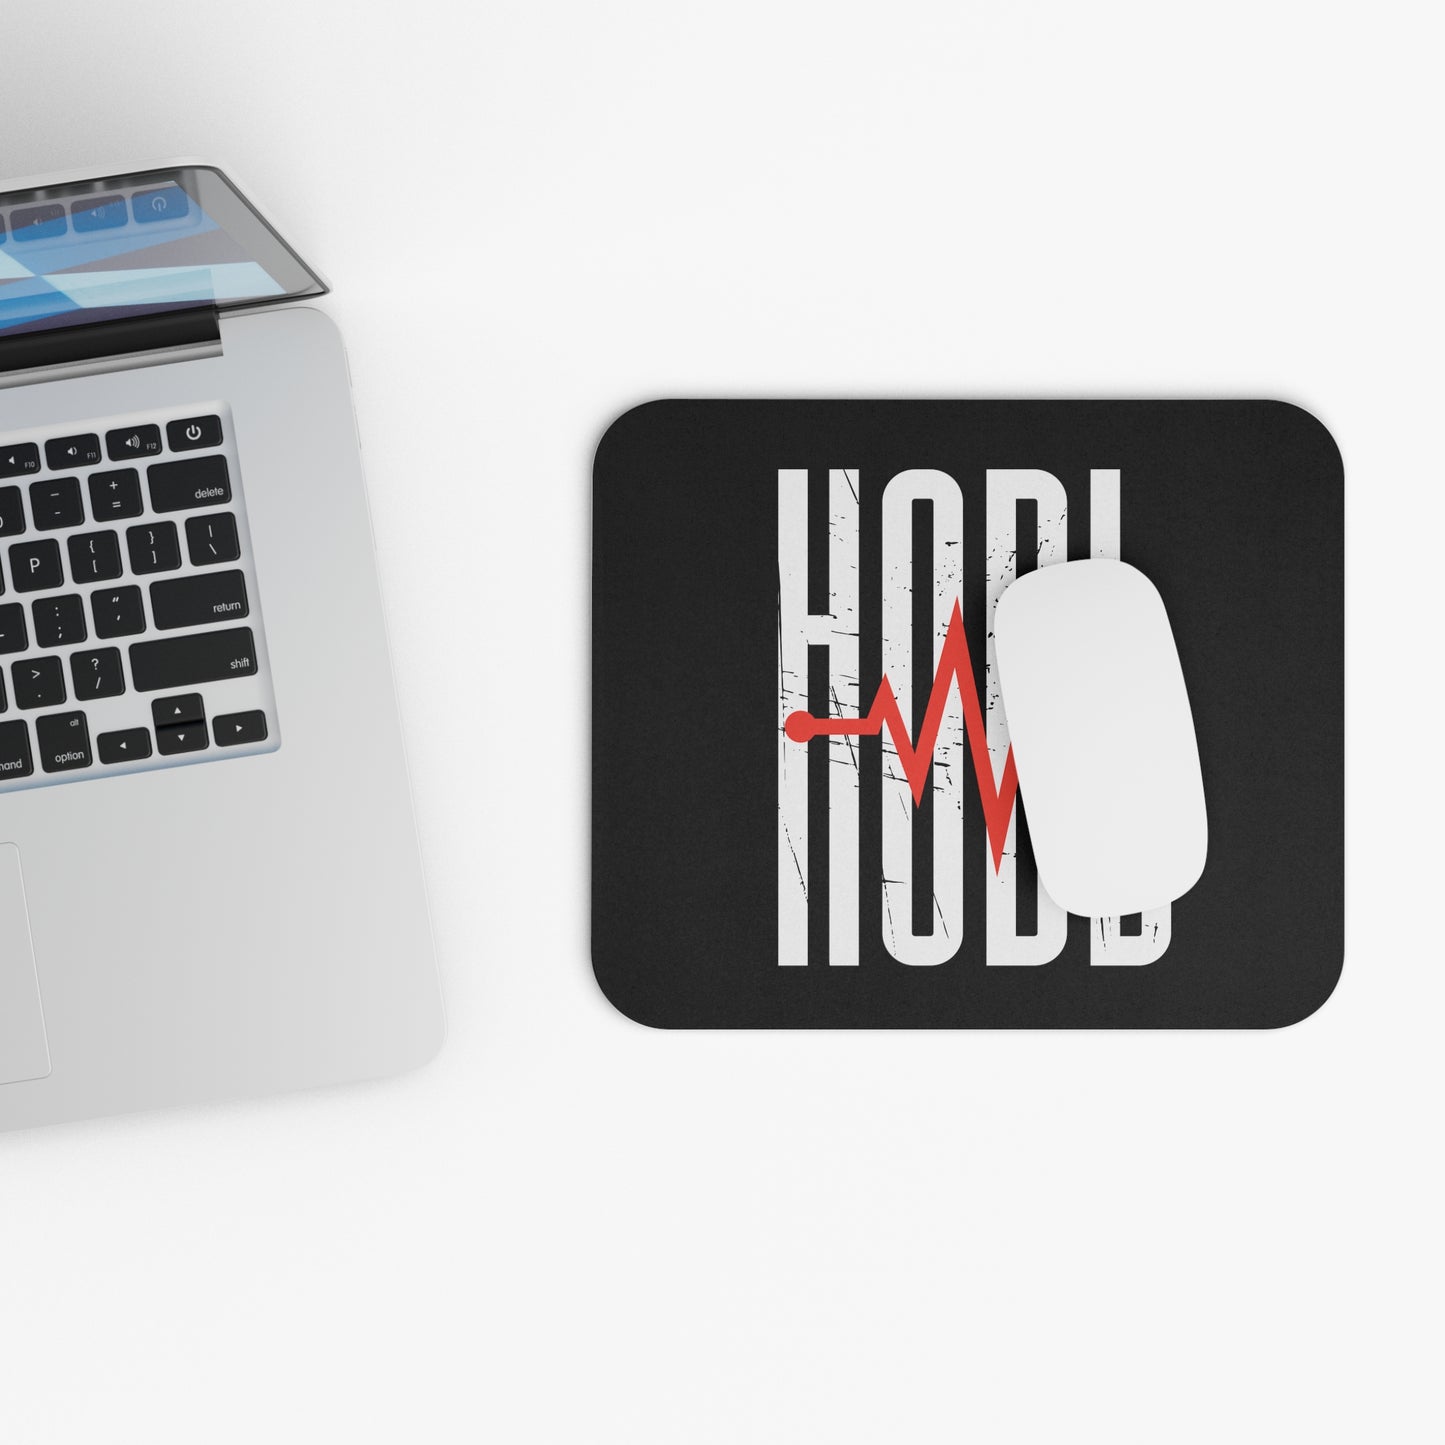 HODL The Line Mouse Pad